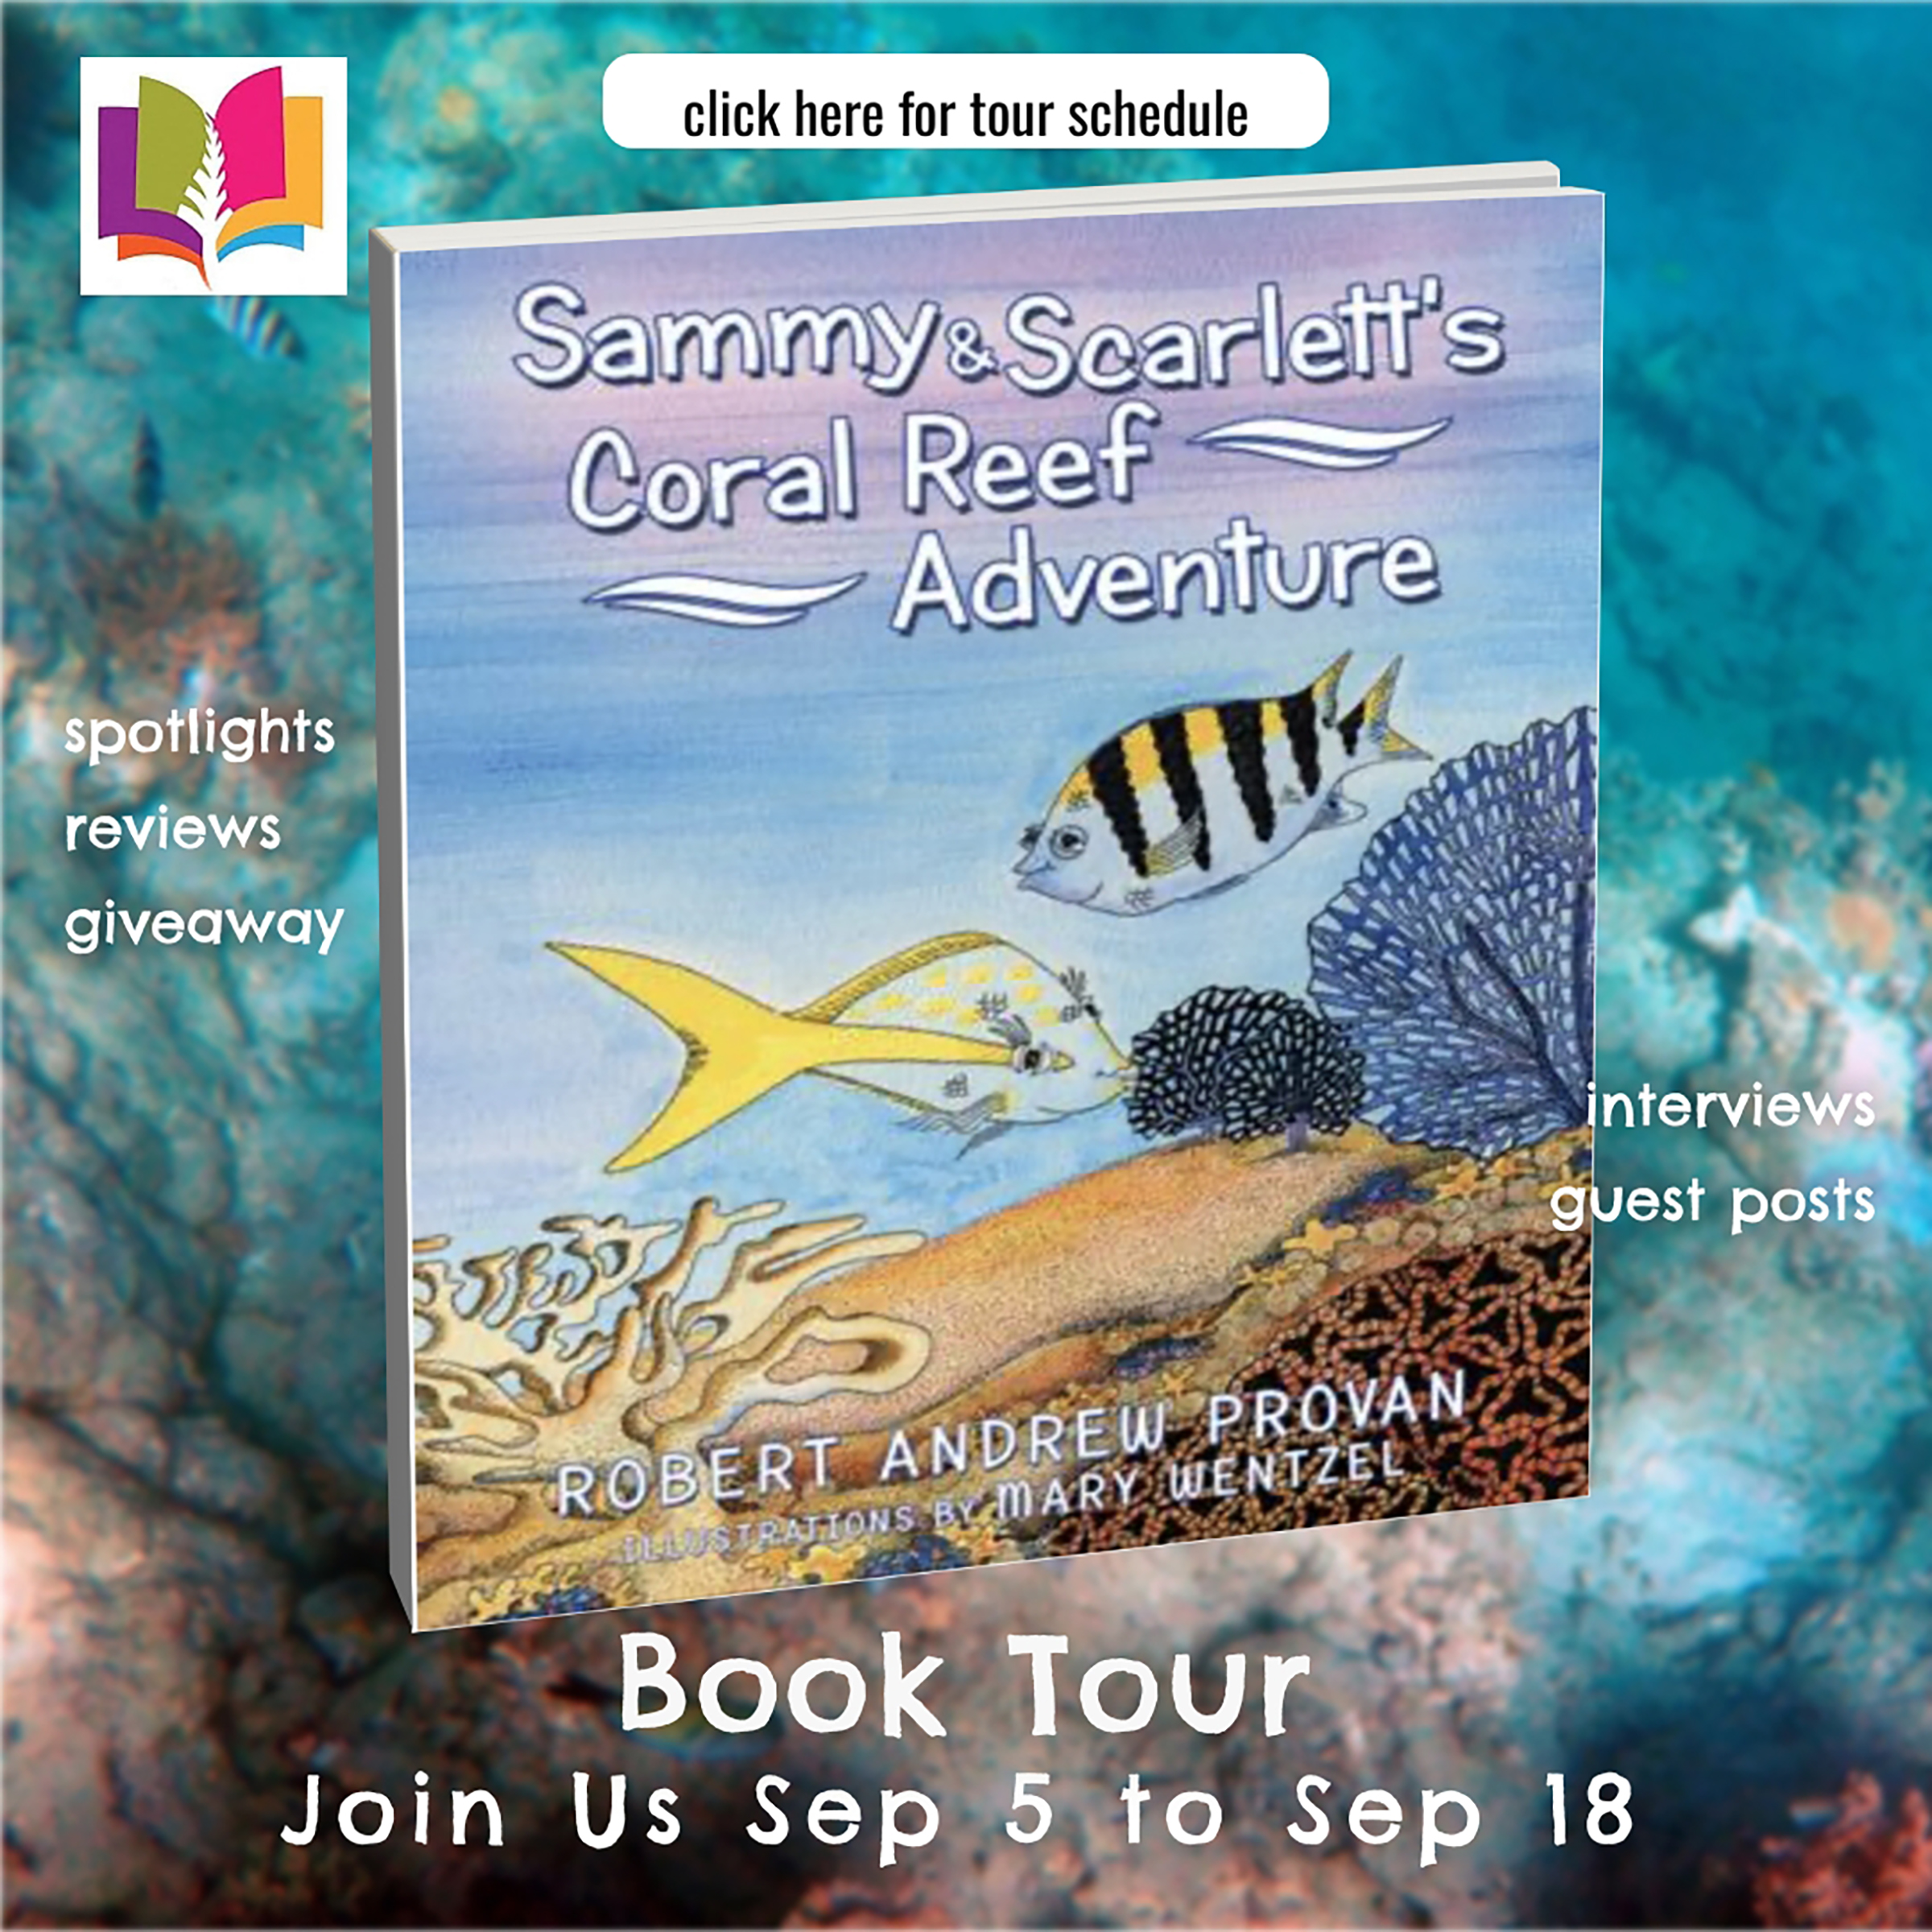 Sammy & Scarlett's Coral Reef Adventure by Robert Andrew Provan | Book Review ~ Author Guest Post ~ (1) Signed Copy Available | #ChildrensBook #Ecology @iReadBookTours